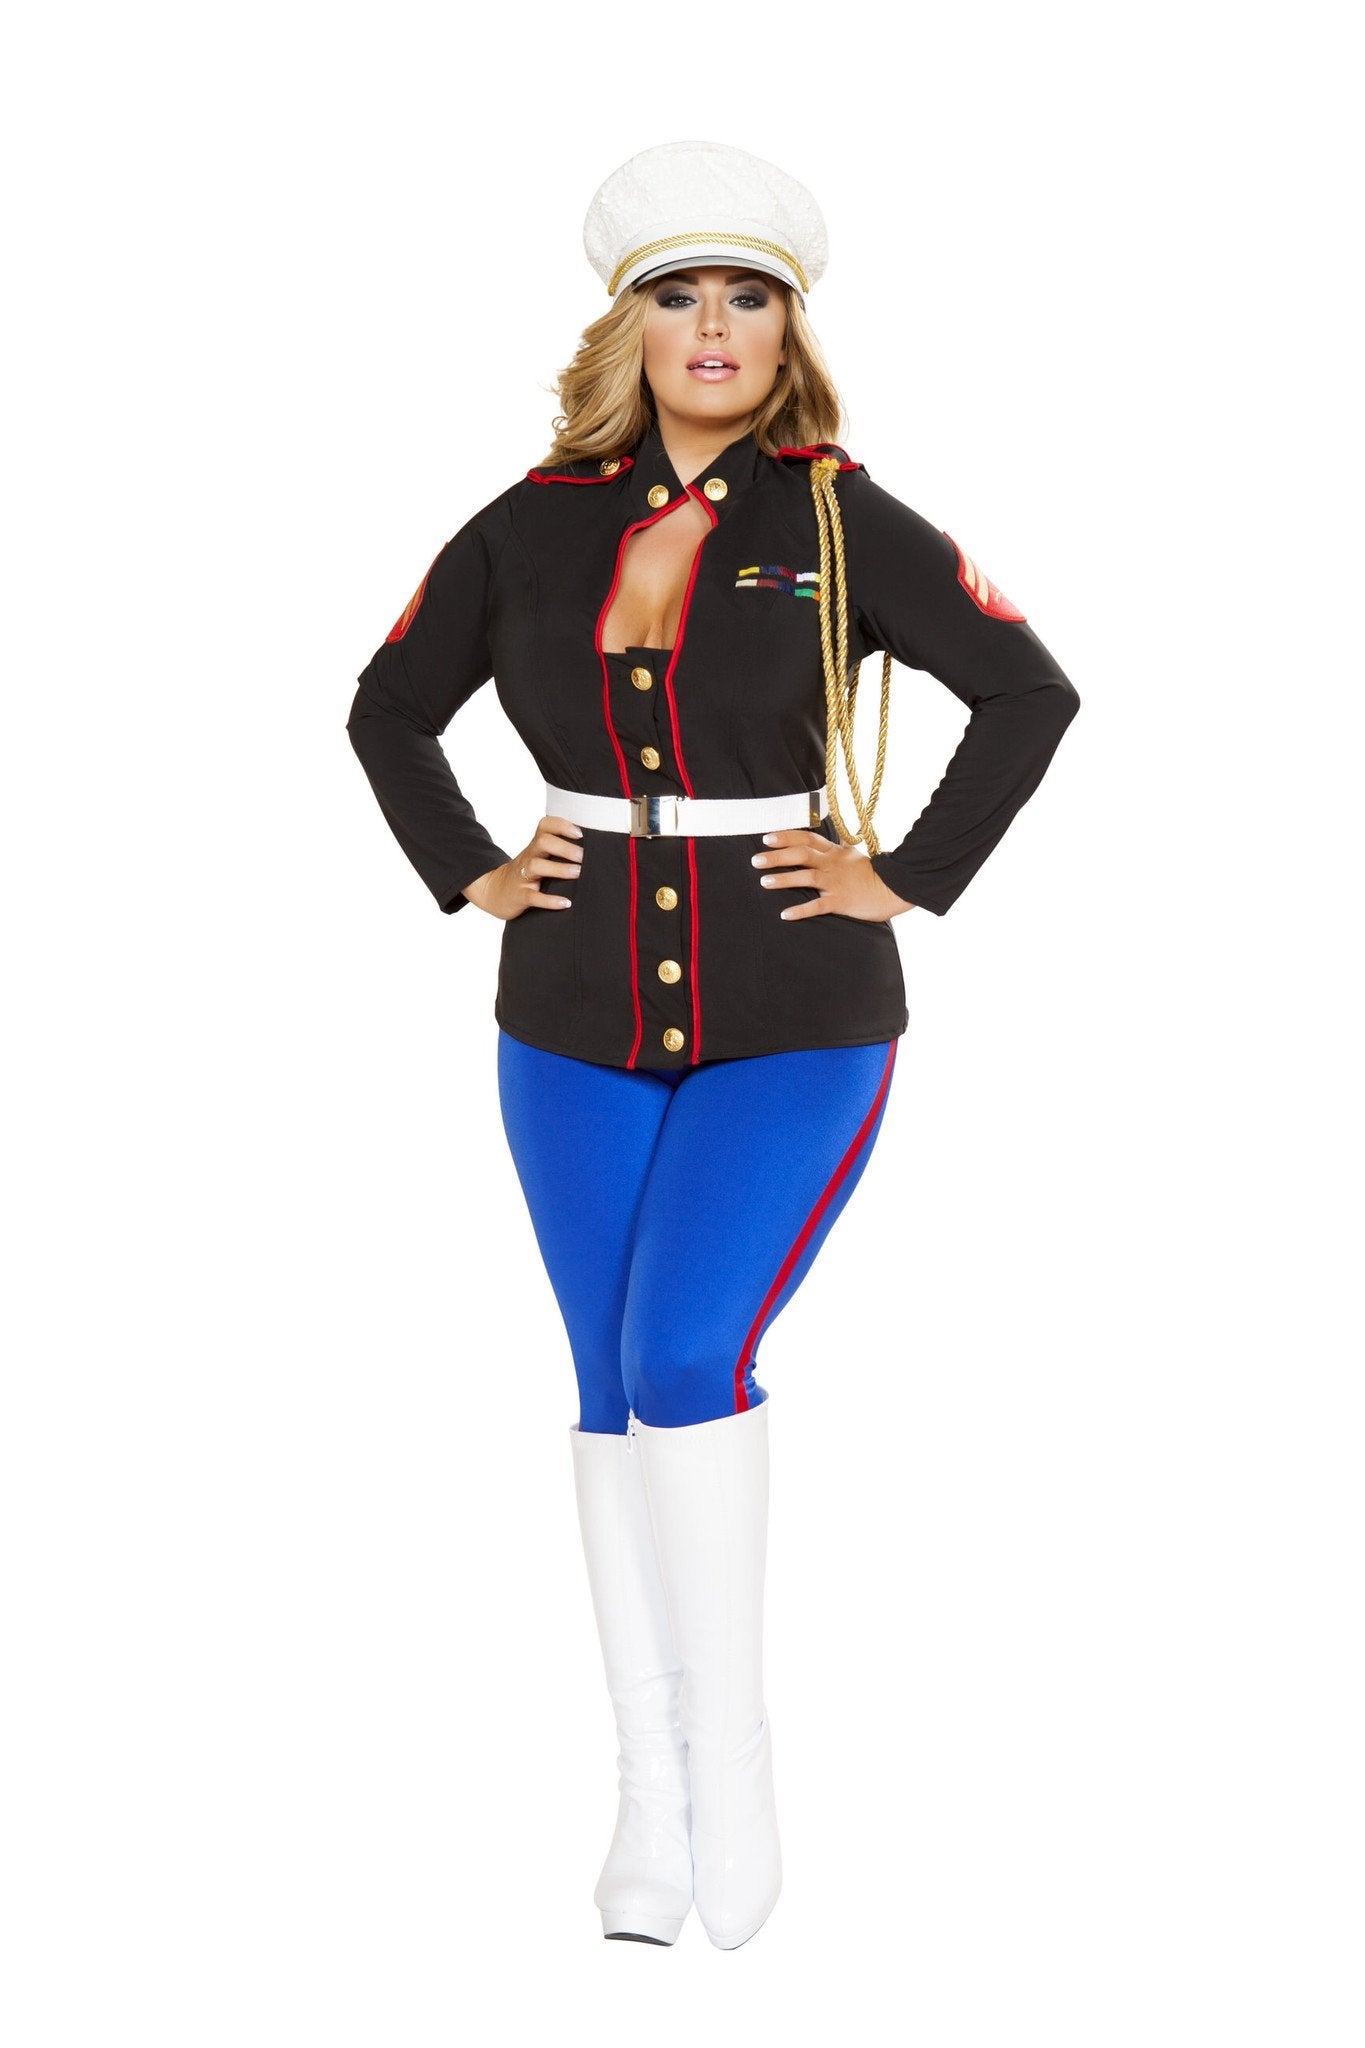 Buy 3pc Sexy Marine Corporal from RomaRetailShop for 98.99 with Same Day Shipping Designed by Roma Costume 4701-AS-XL